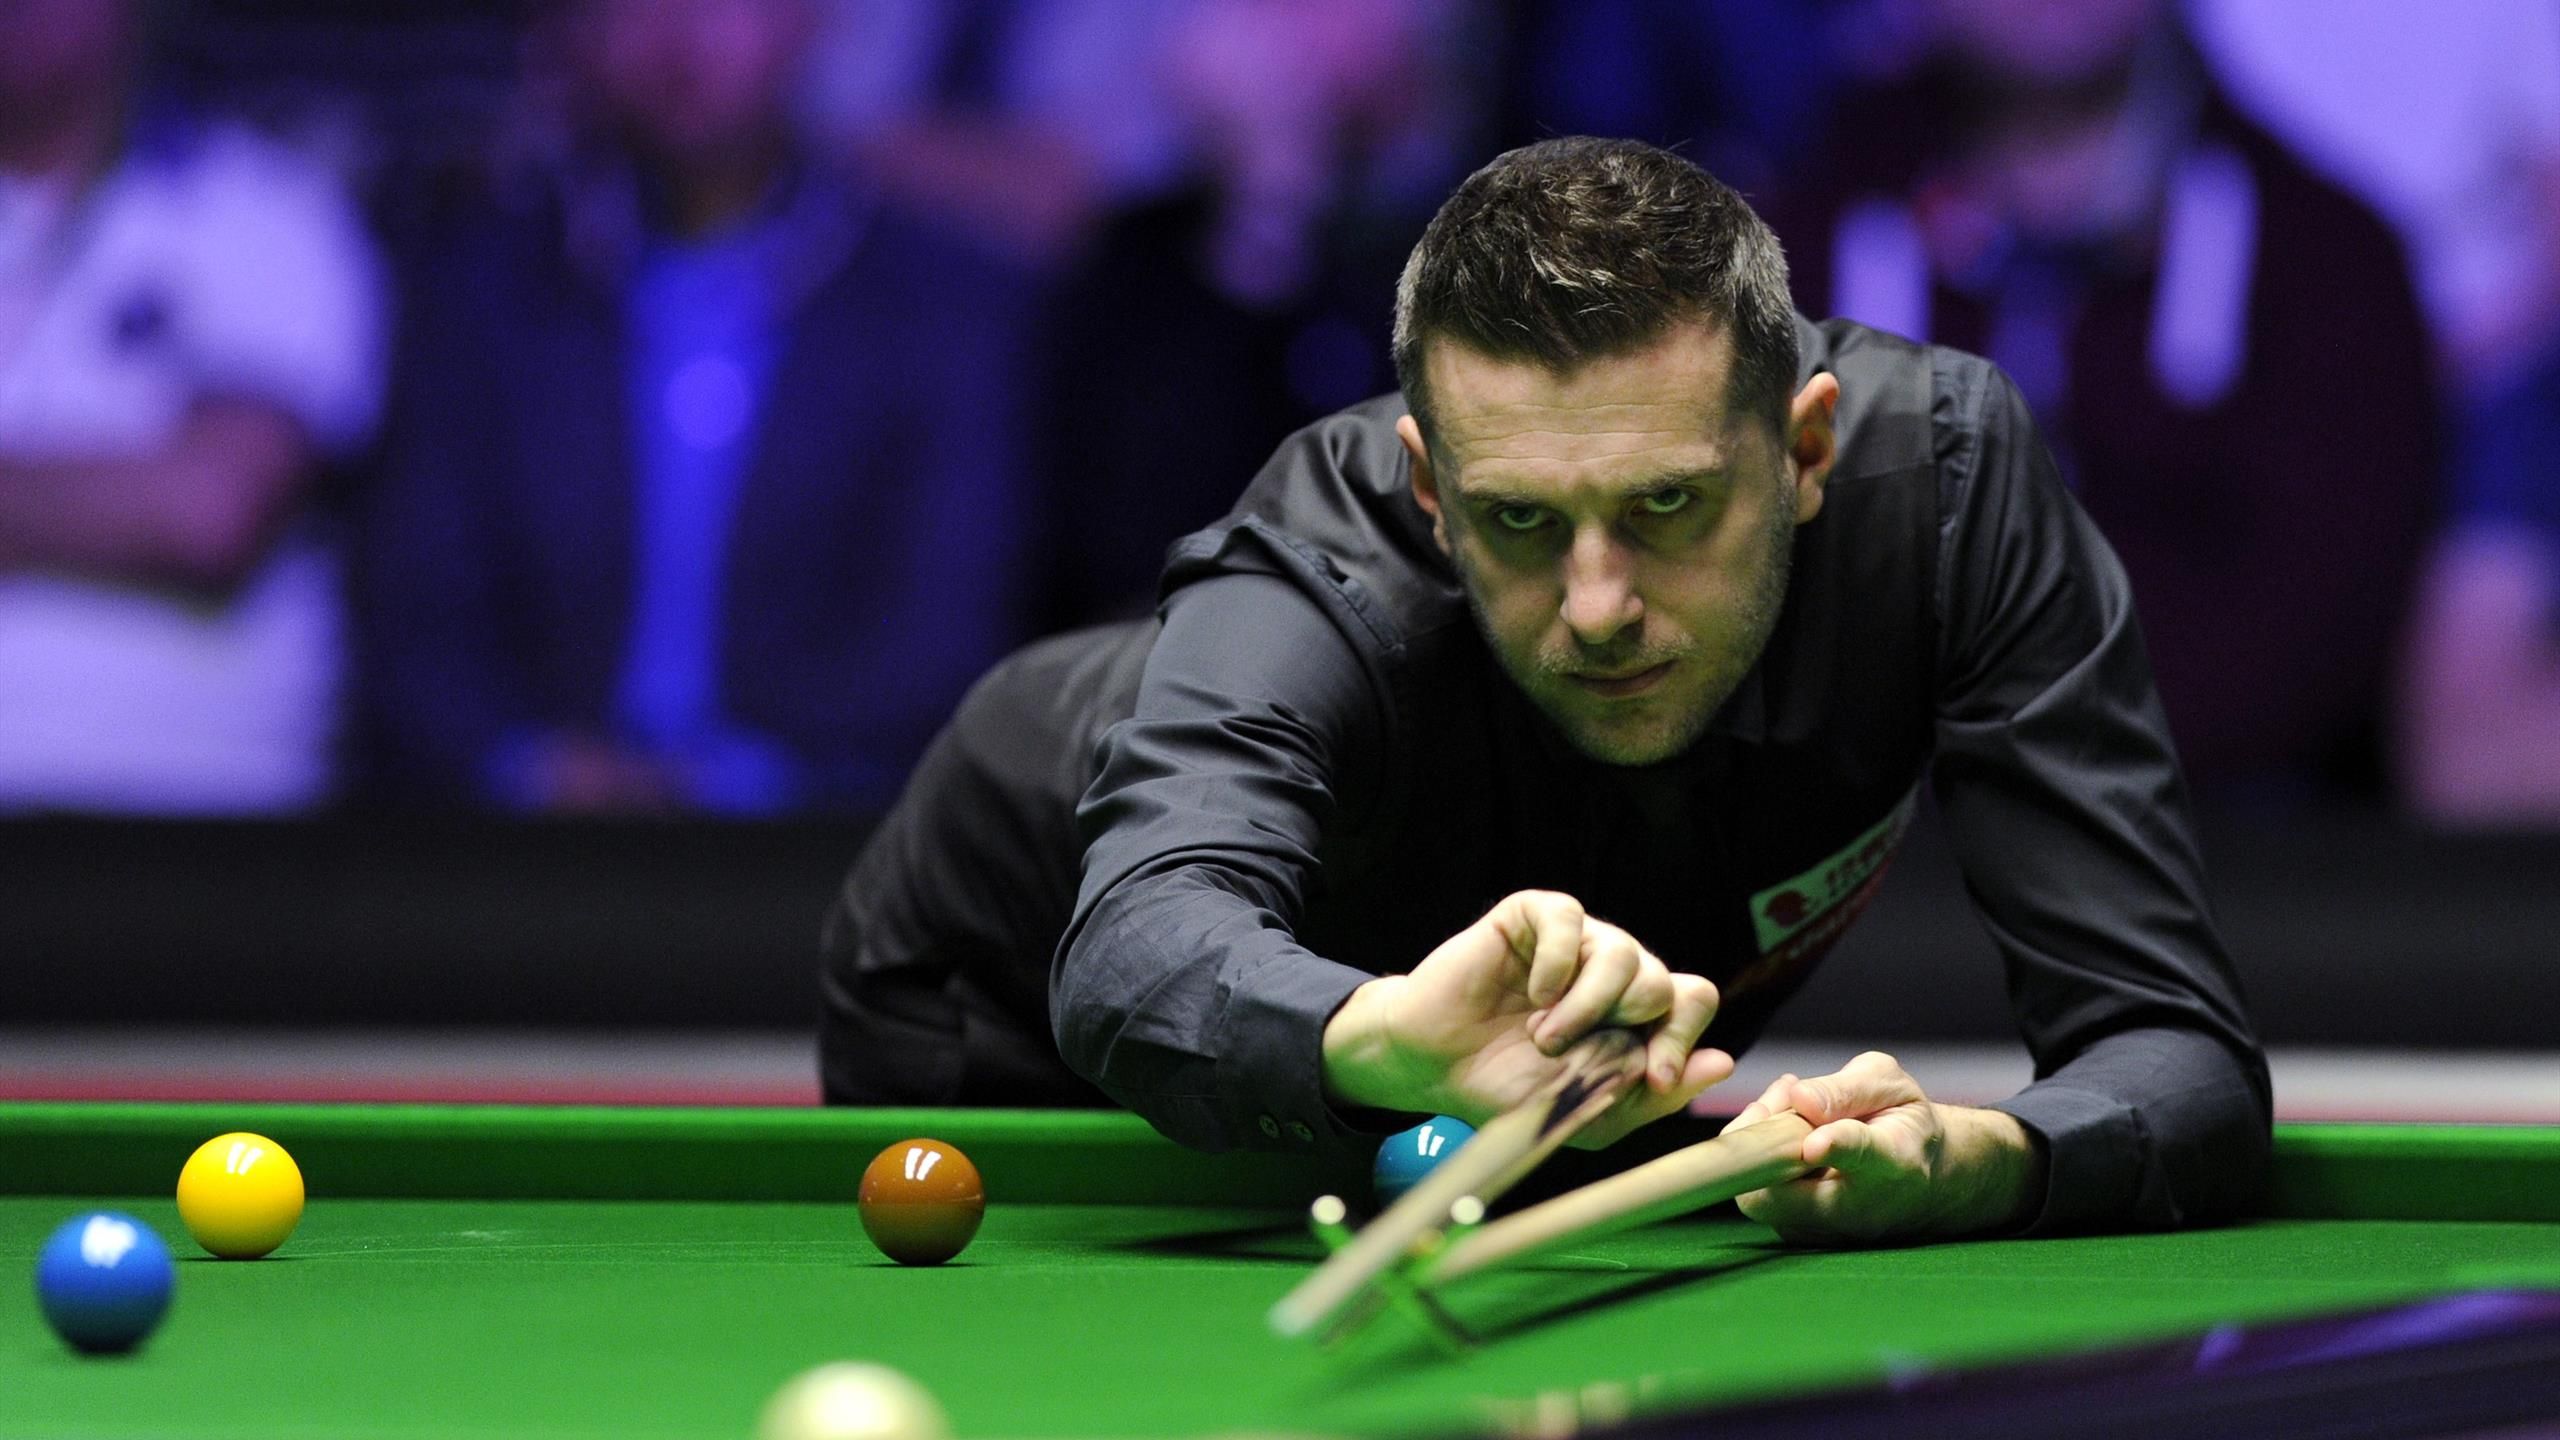 Gary Wilson leads three-time champion Mark Selby, Kyren Wilson sets up Barry Hawkins meeting